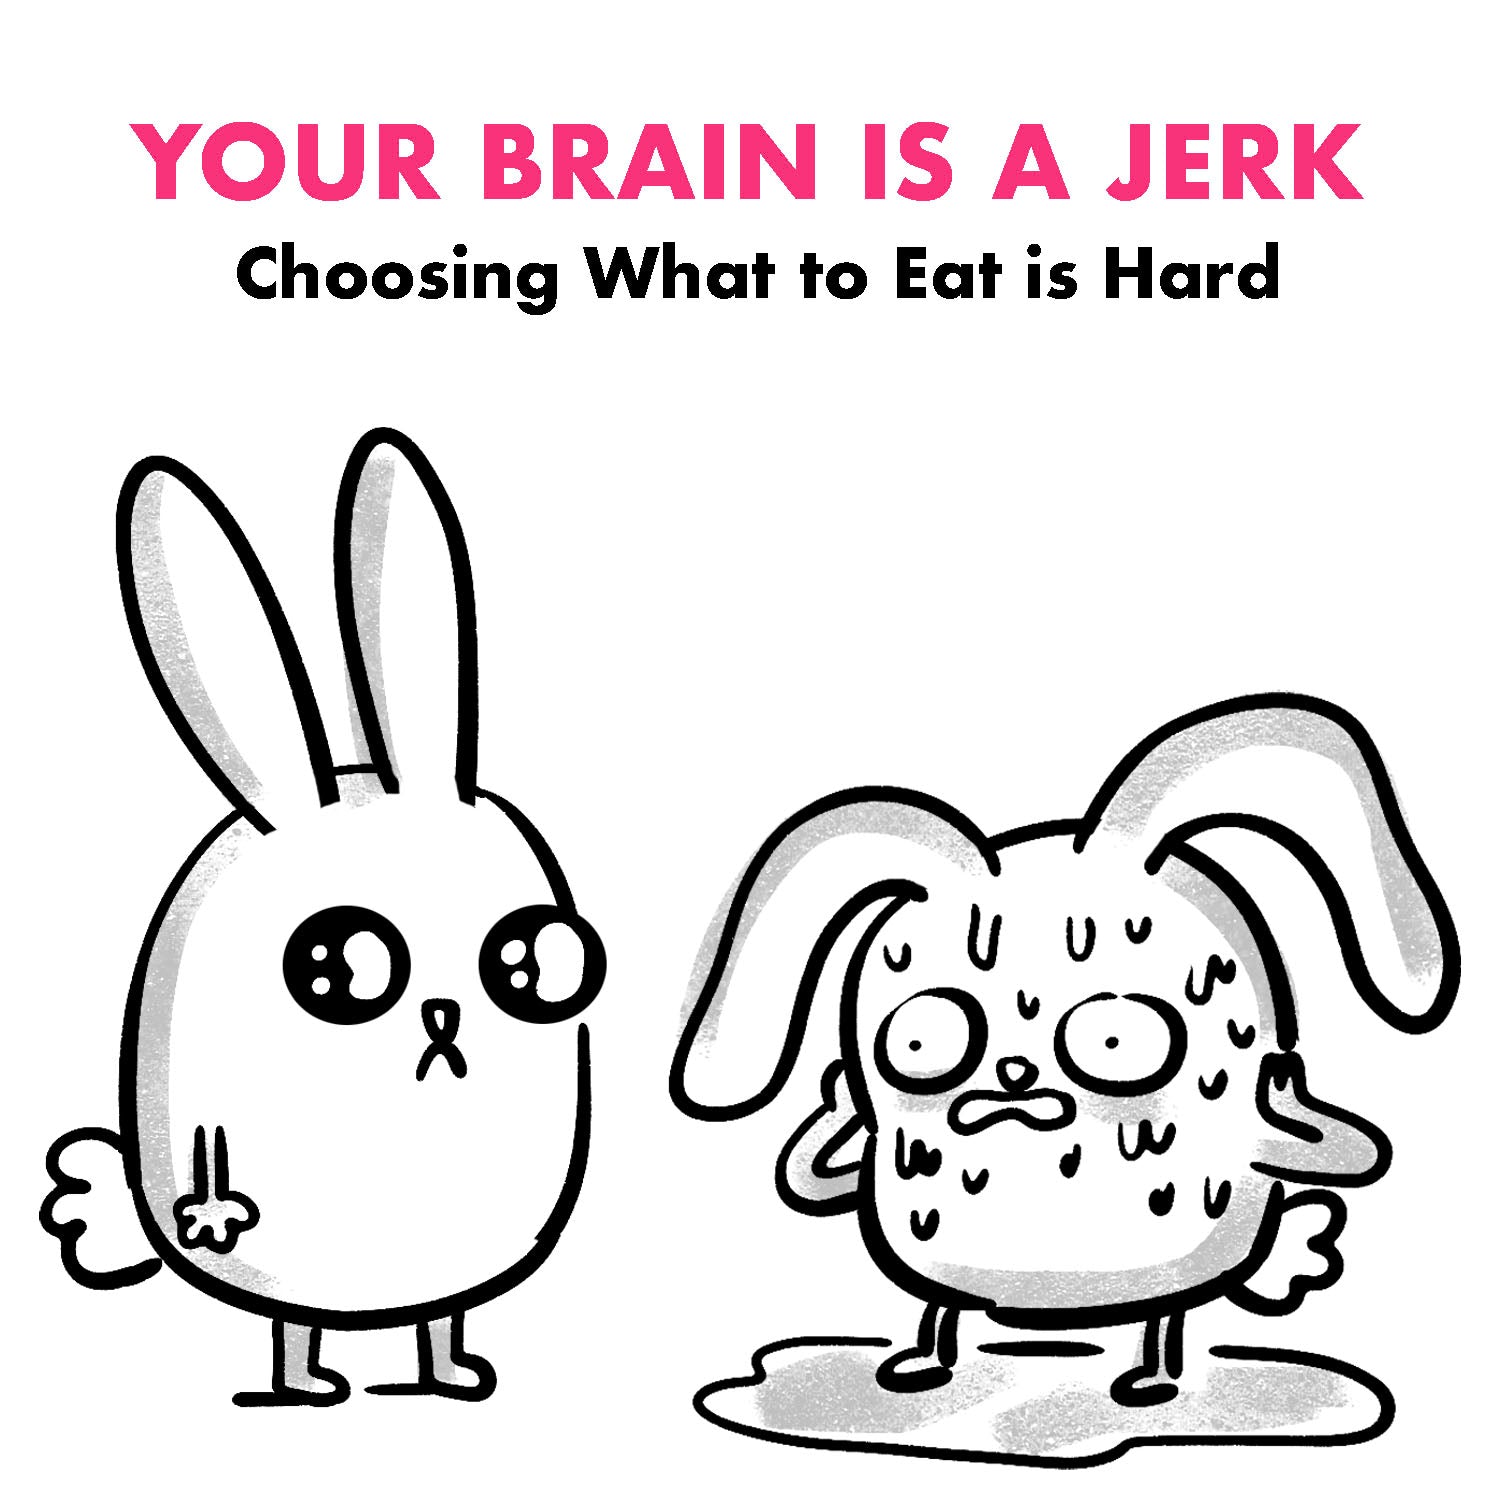 Your Brain is a Jerk - Choices